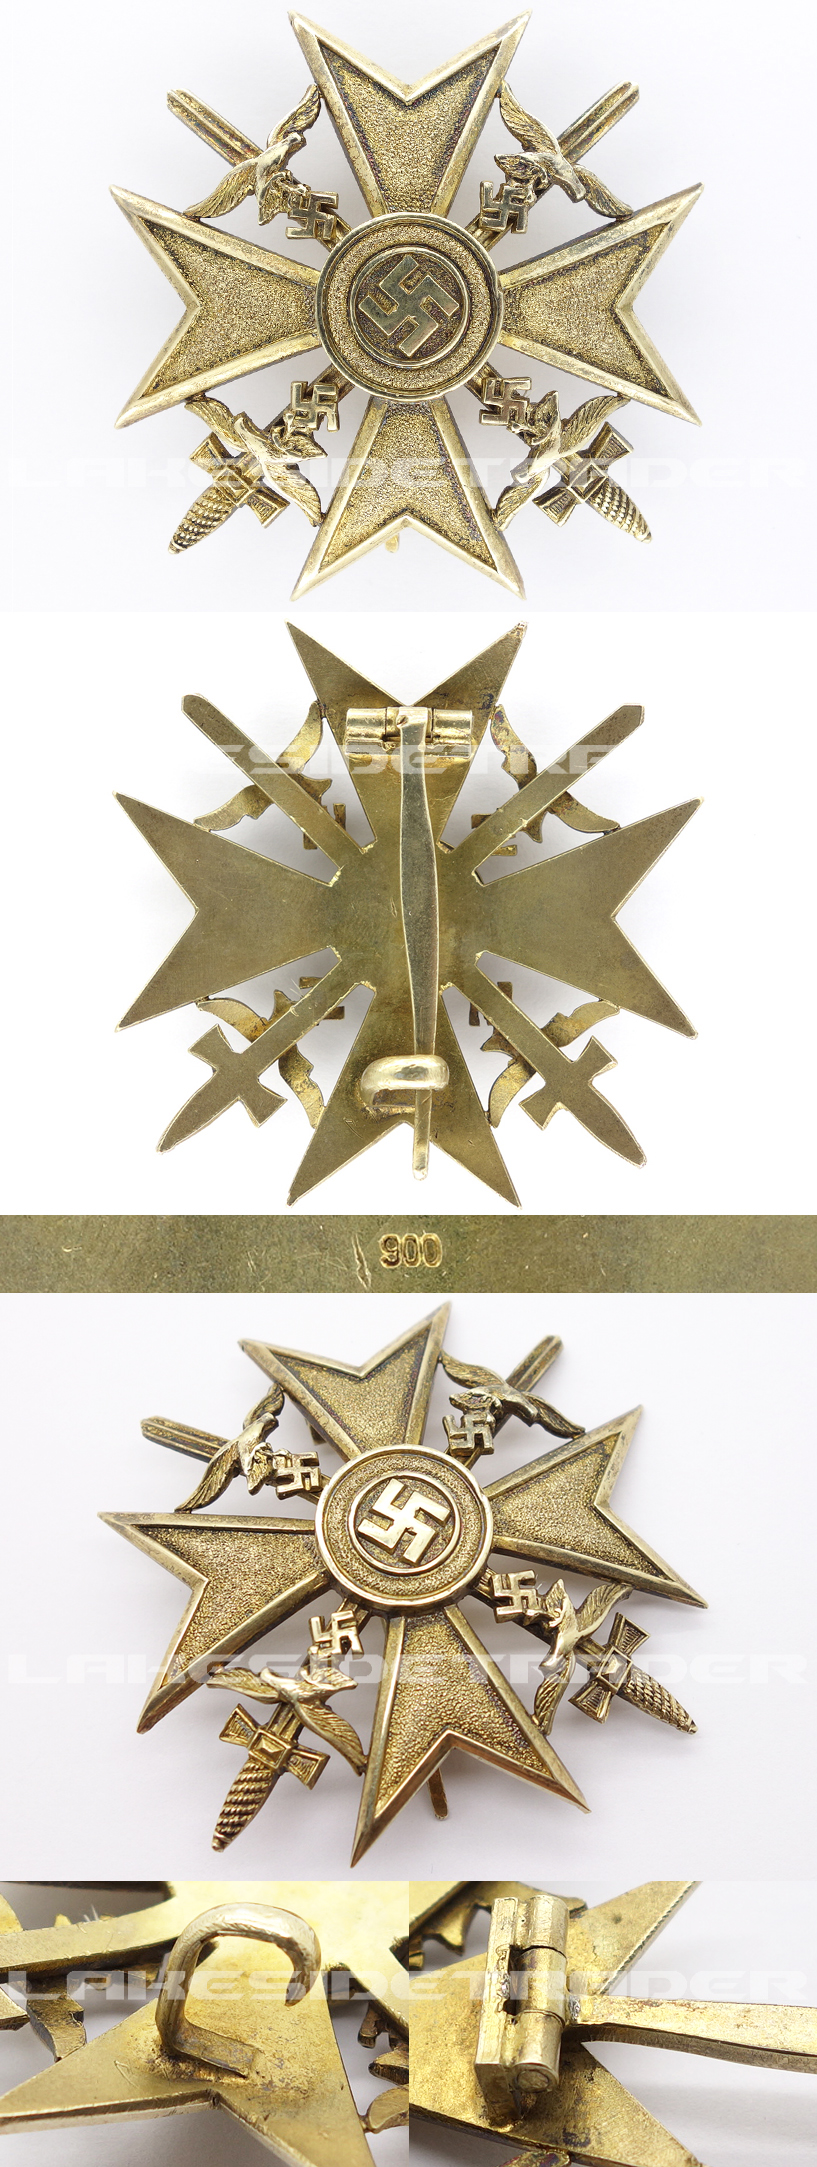 Spanish Cross in Gold with Swords 